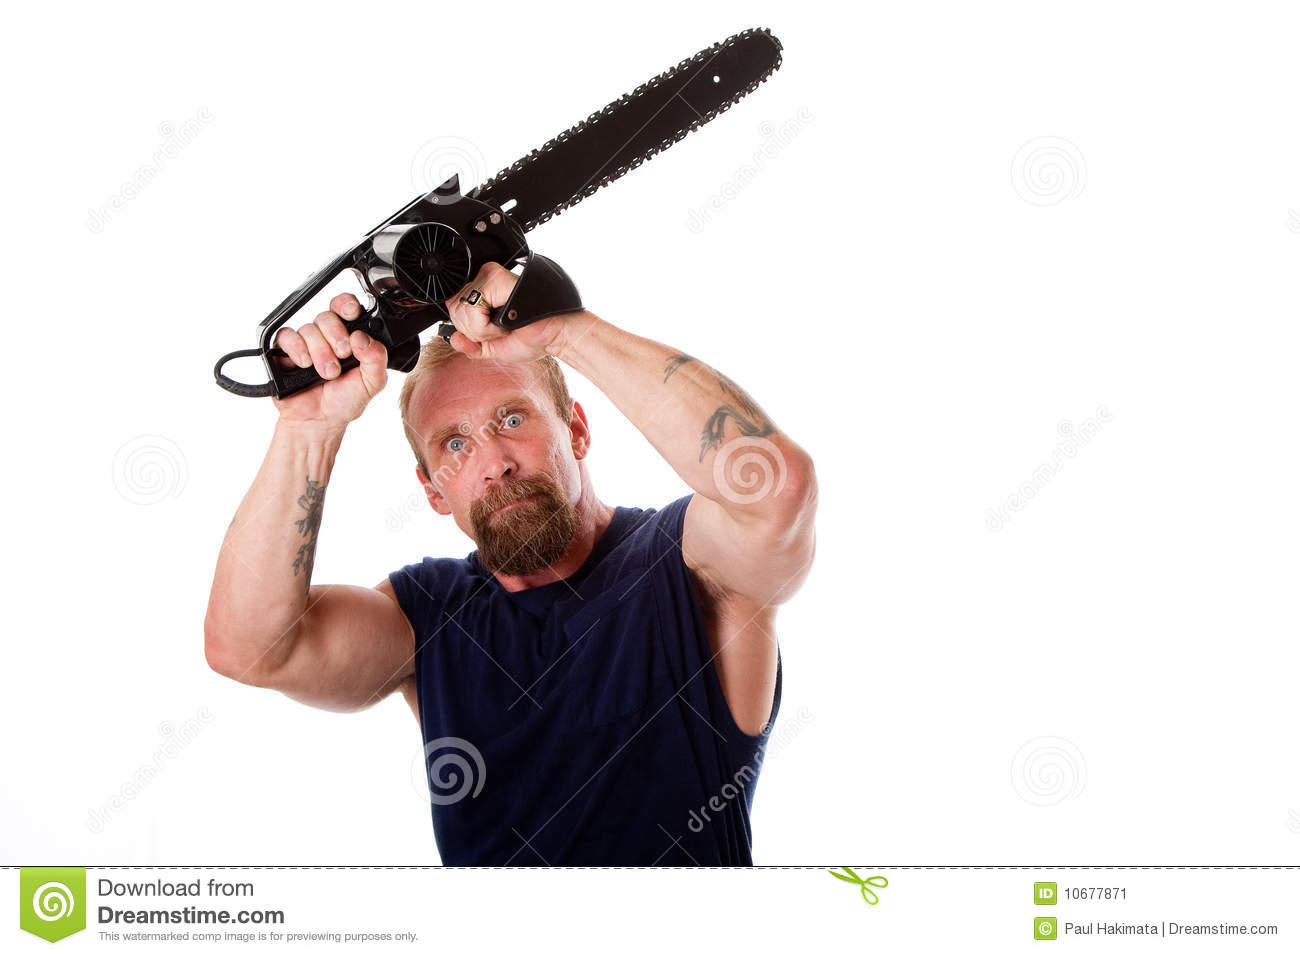 Crazy Guy With Chainsaw Stock Image   Image  10677871